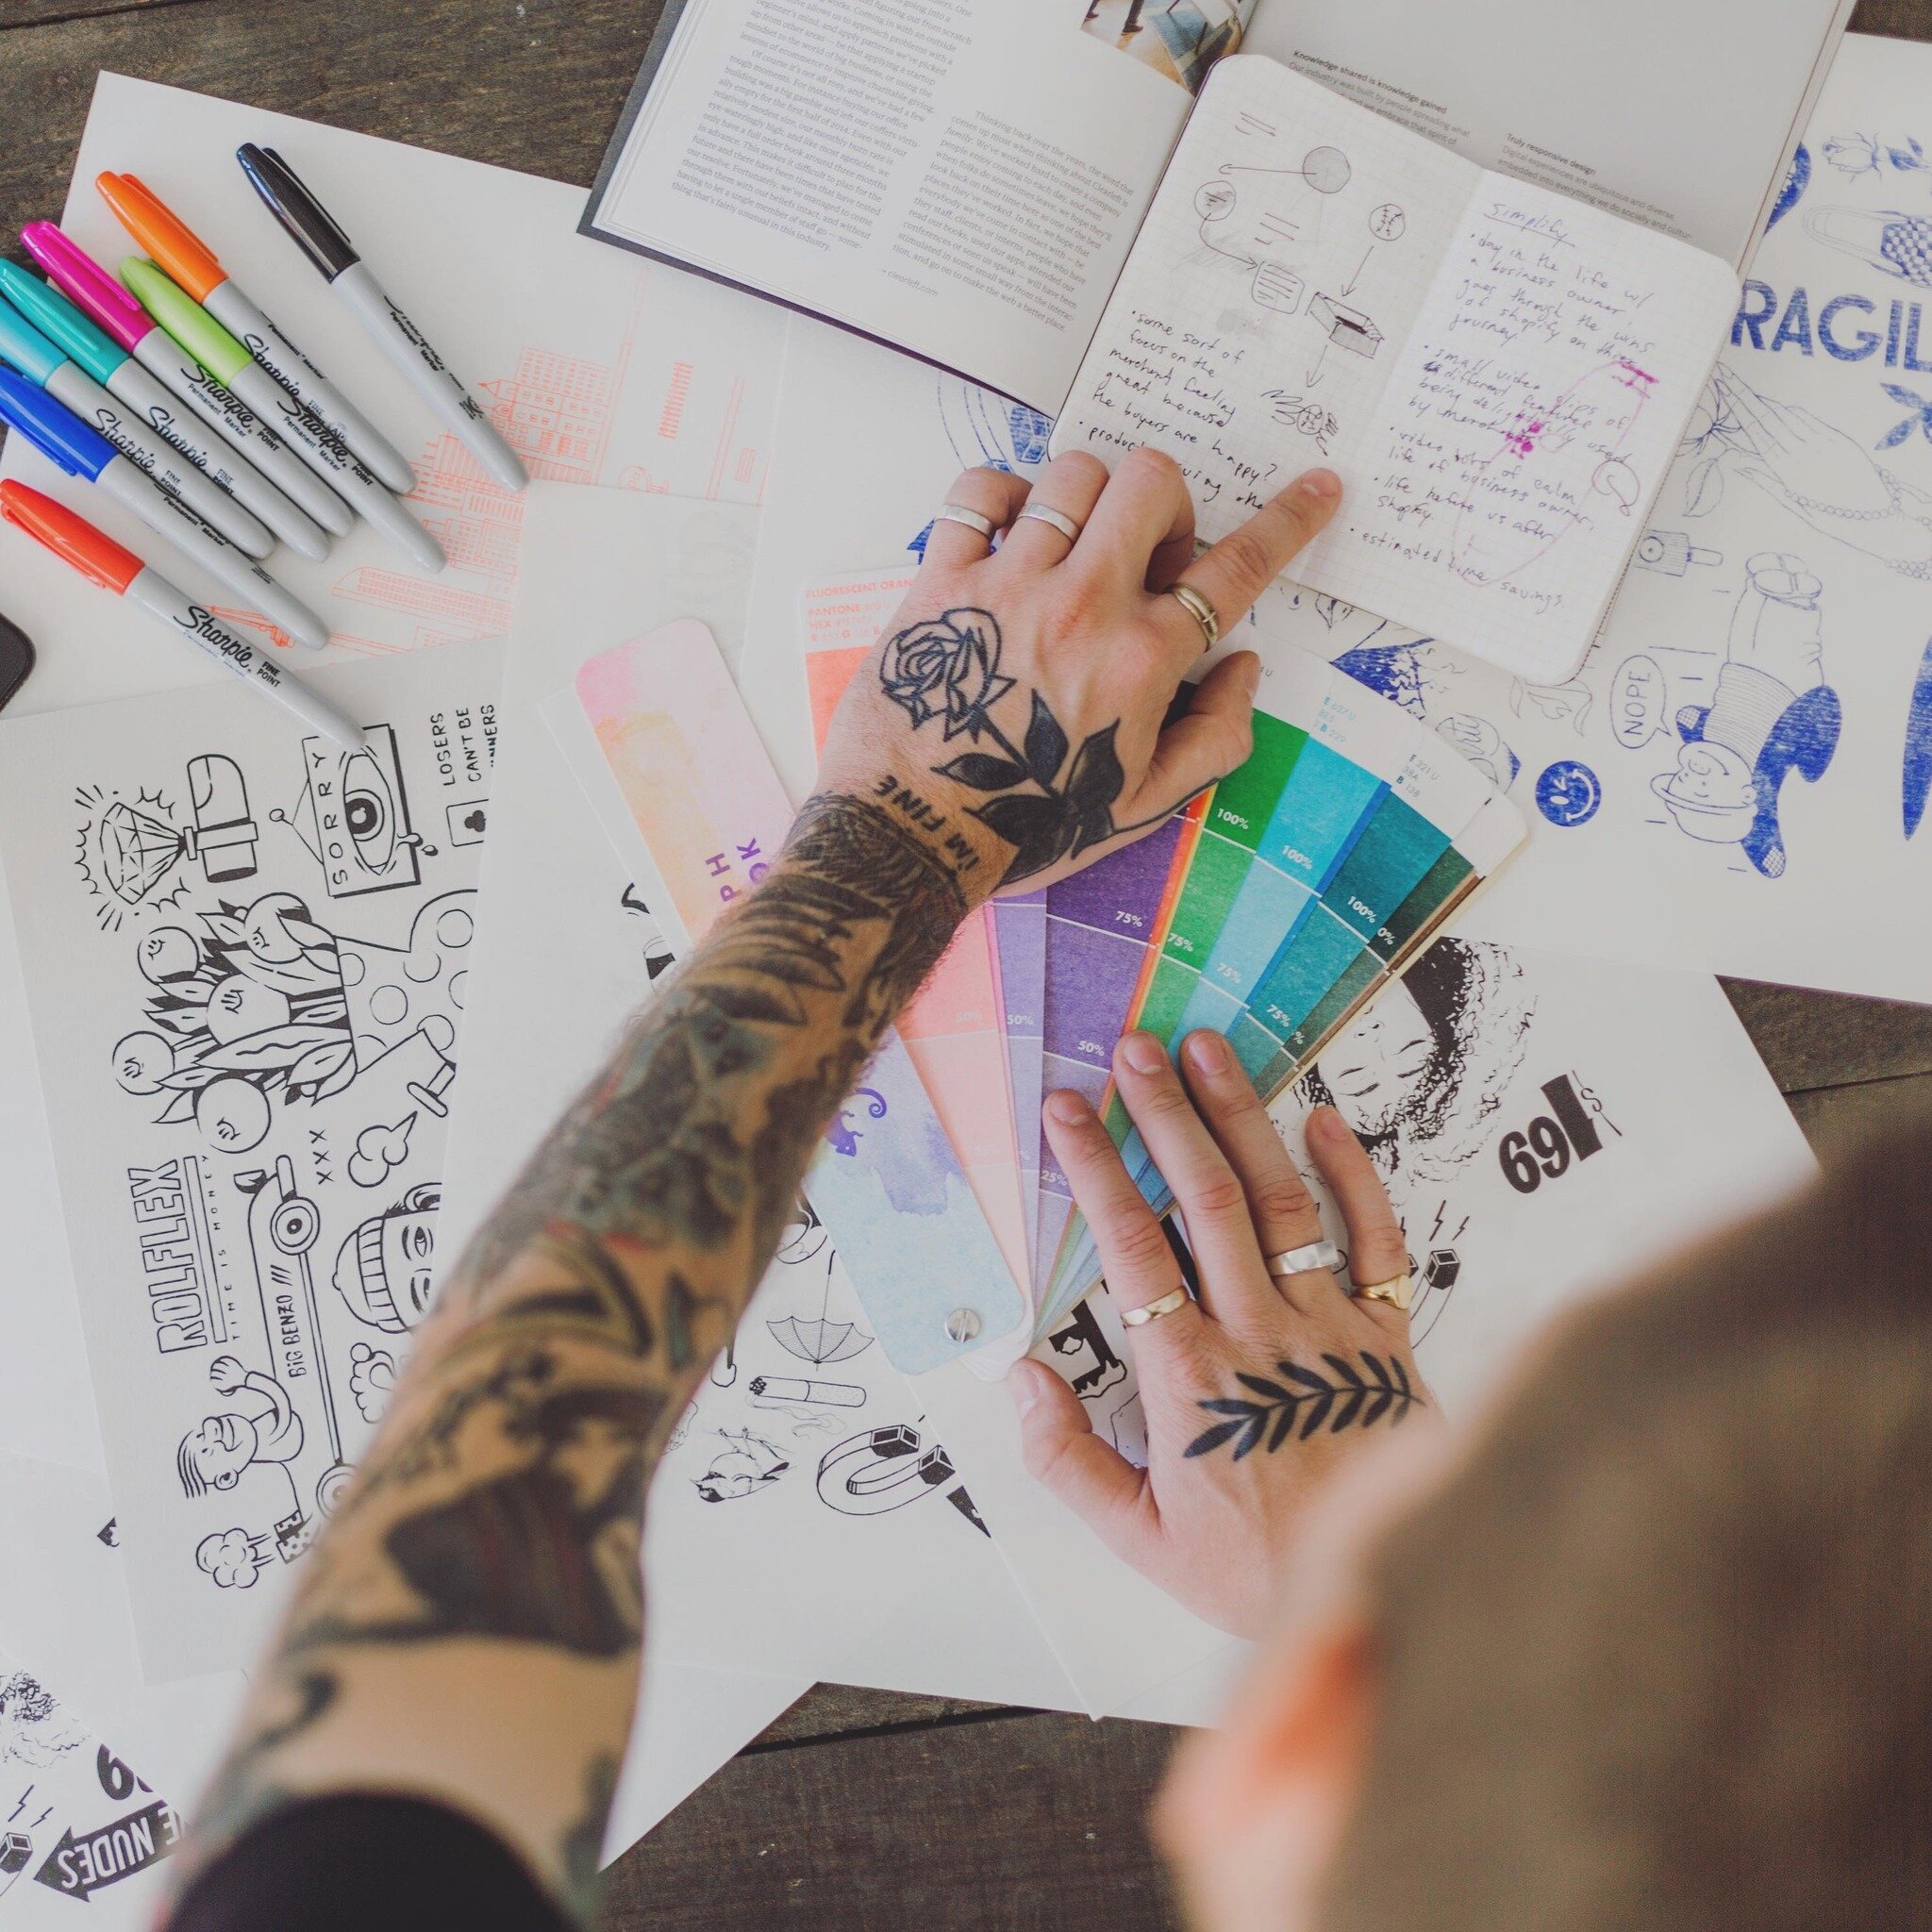 Our most recent blog post has all the things to consider when designing or redesigning your logo:
1. What makes your brand stand out?
2. What do people think or feel when they look at your brand?
3. Does your brand maintain cohesive visual identity a